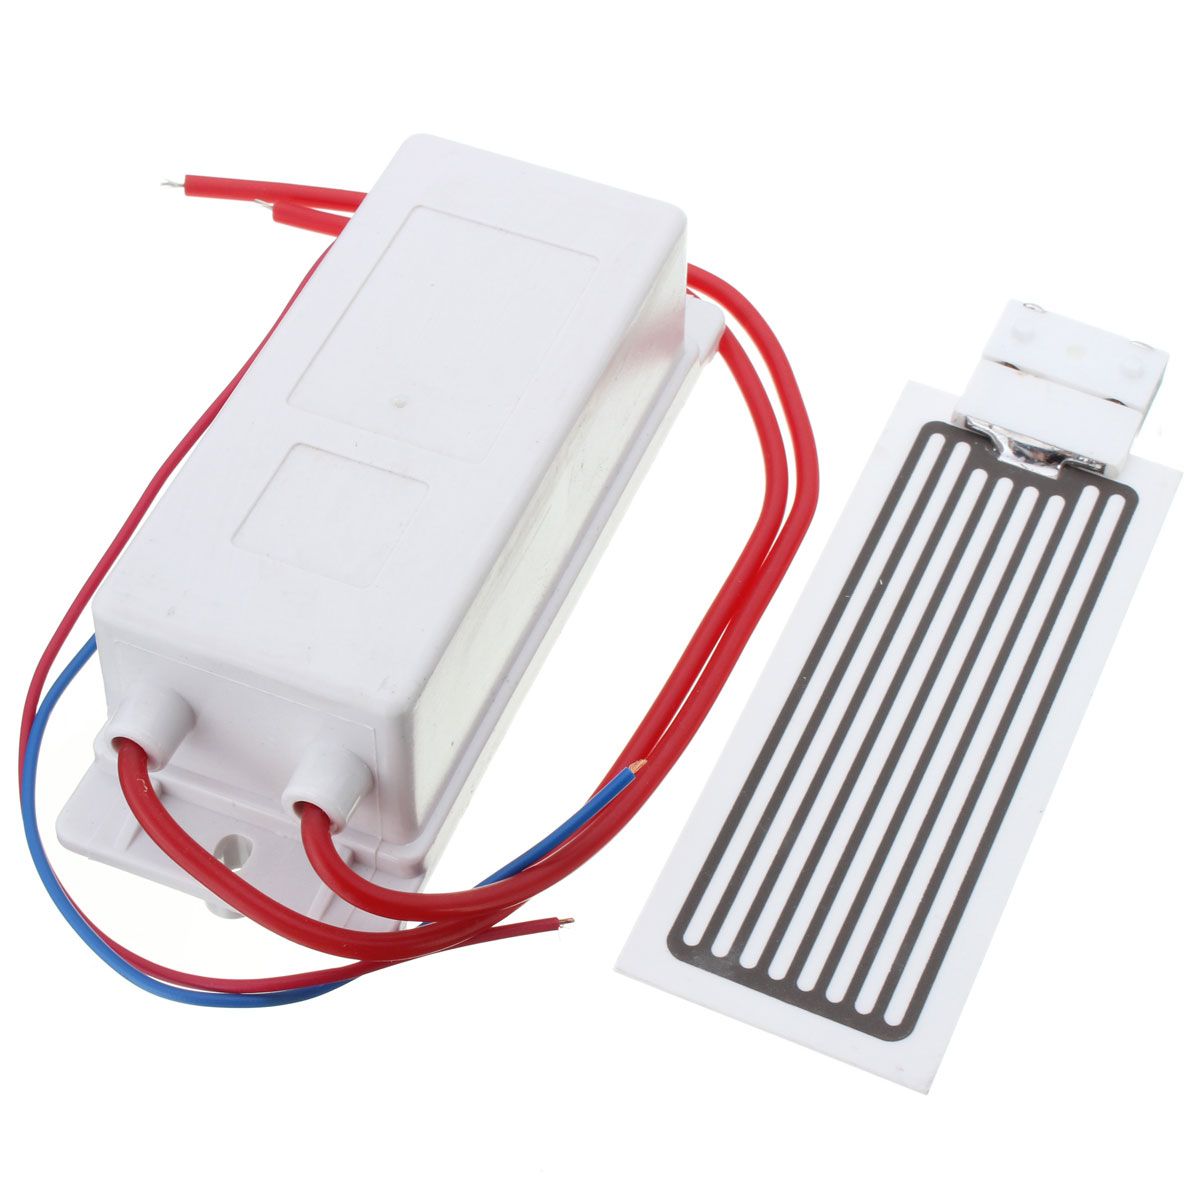 220V-10g-Ozonater-Ozone-Generator-with-Ceramic-Plate-For-Water-Plant-Air-Cleaner-988022